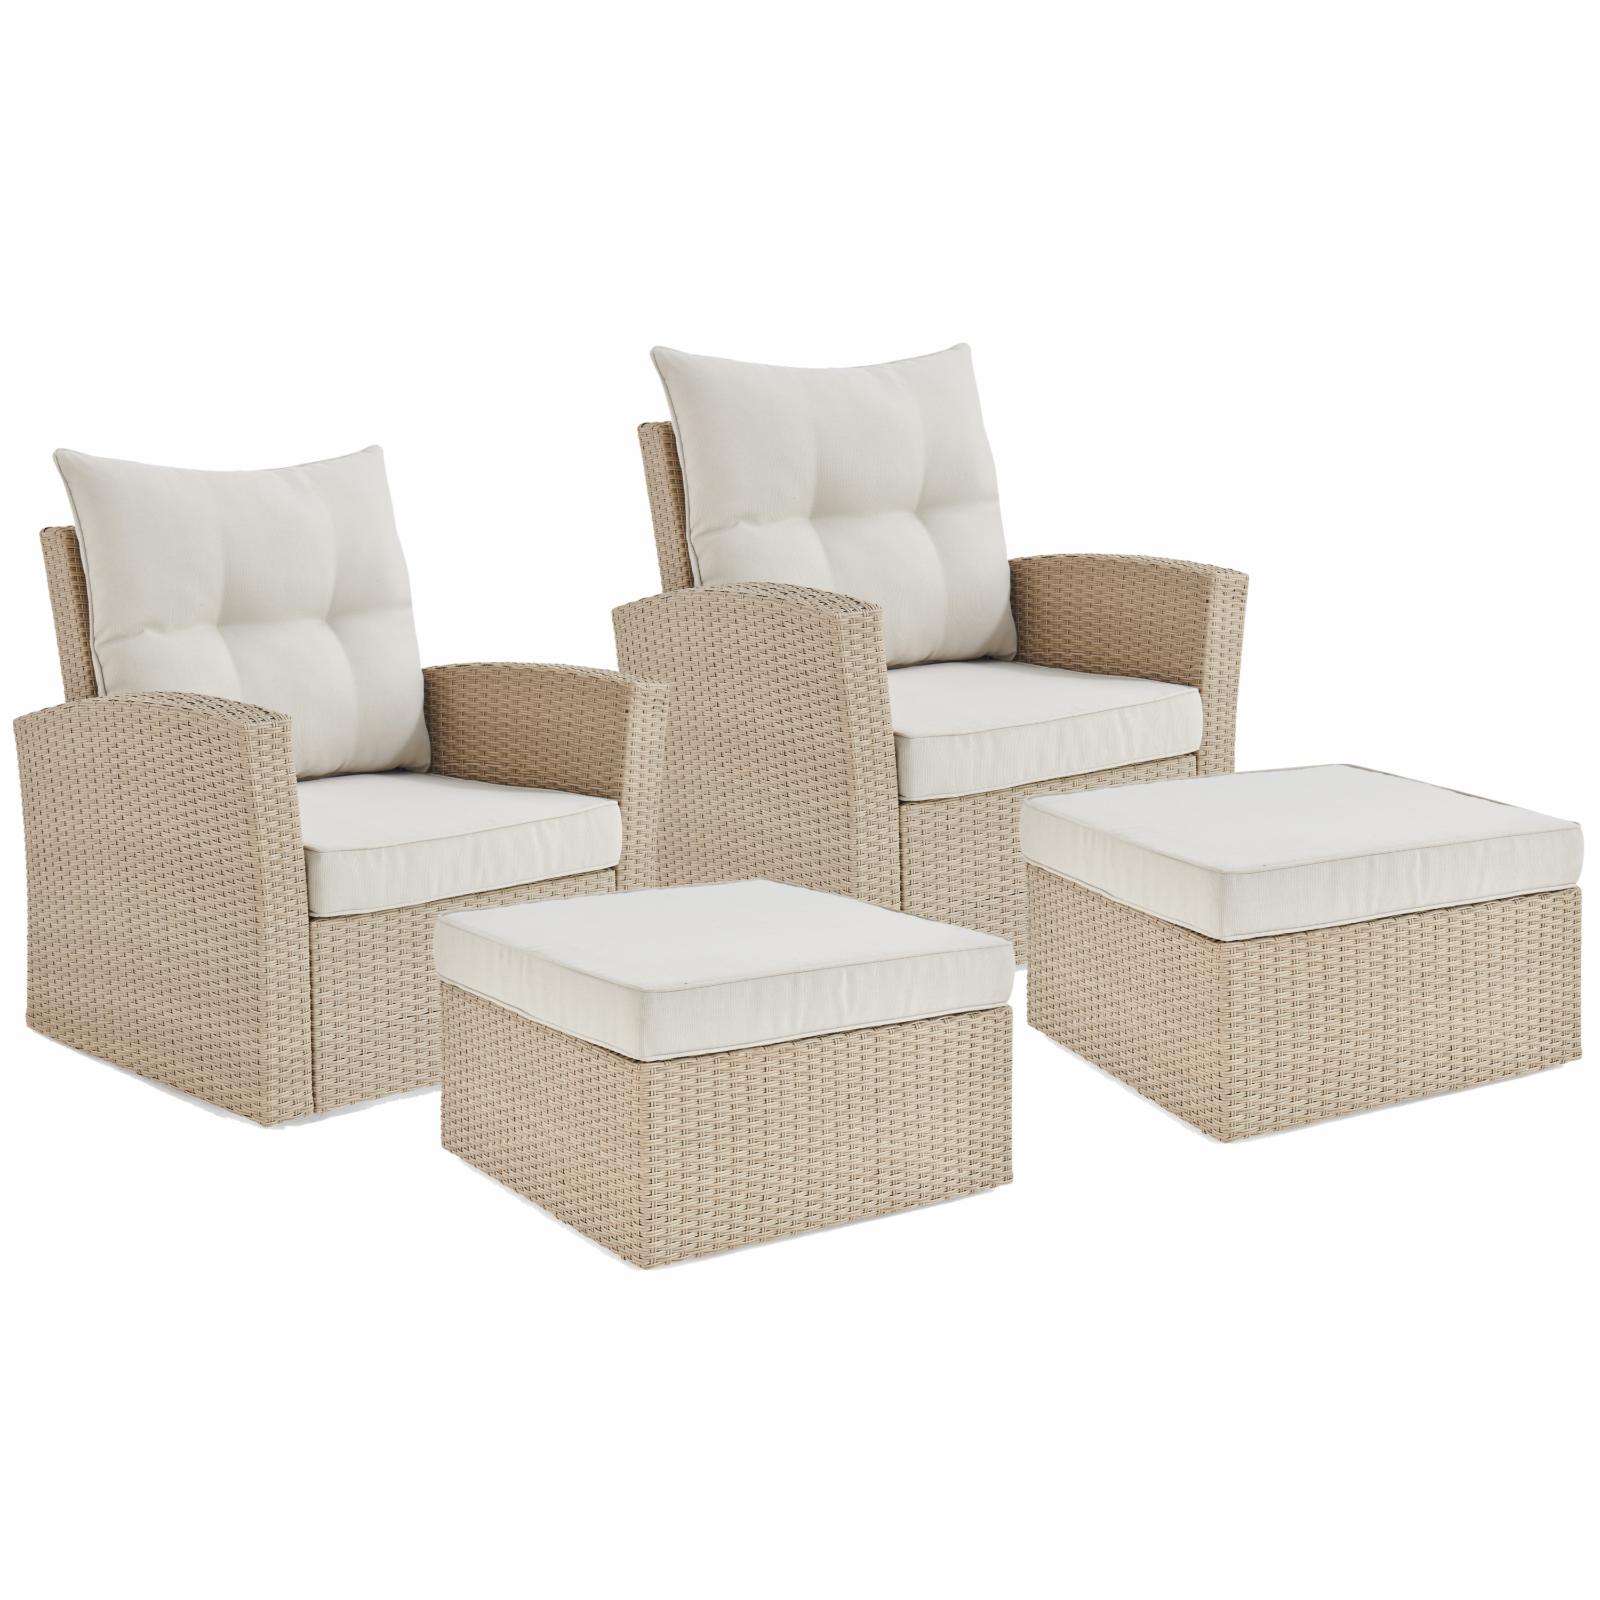 Canaan Cream Wicker Outdoor Seating Set w/ 2 Chairs and 2 Large Ottomans - image 1 of 10